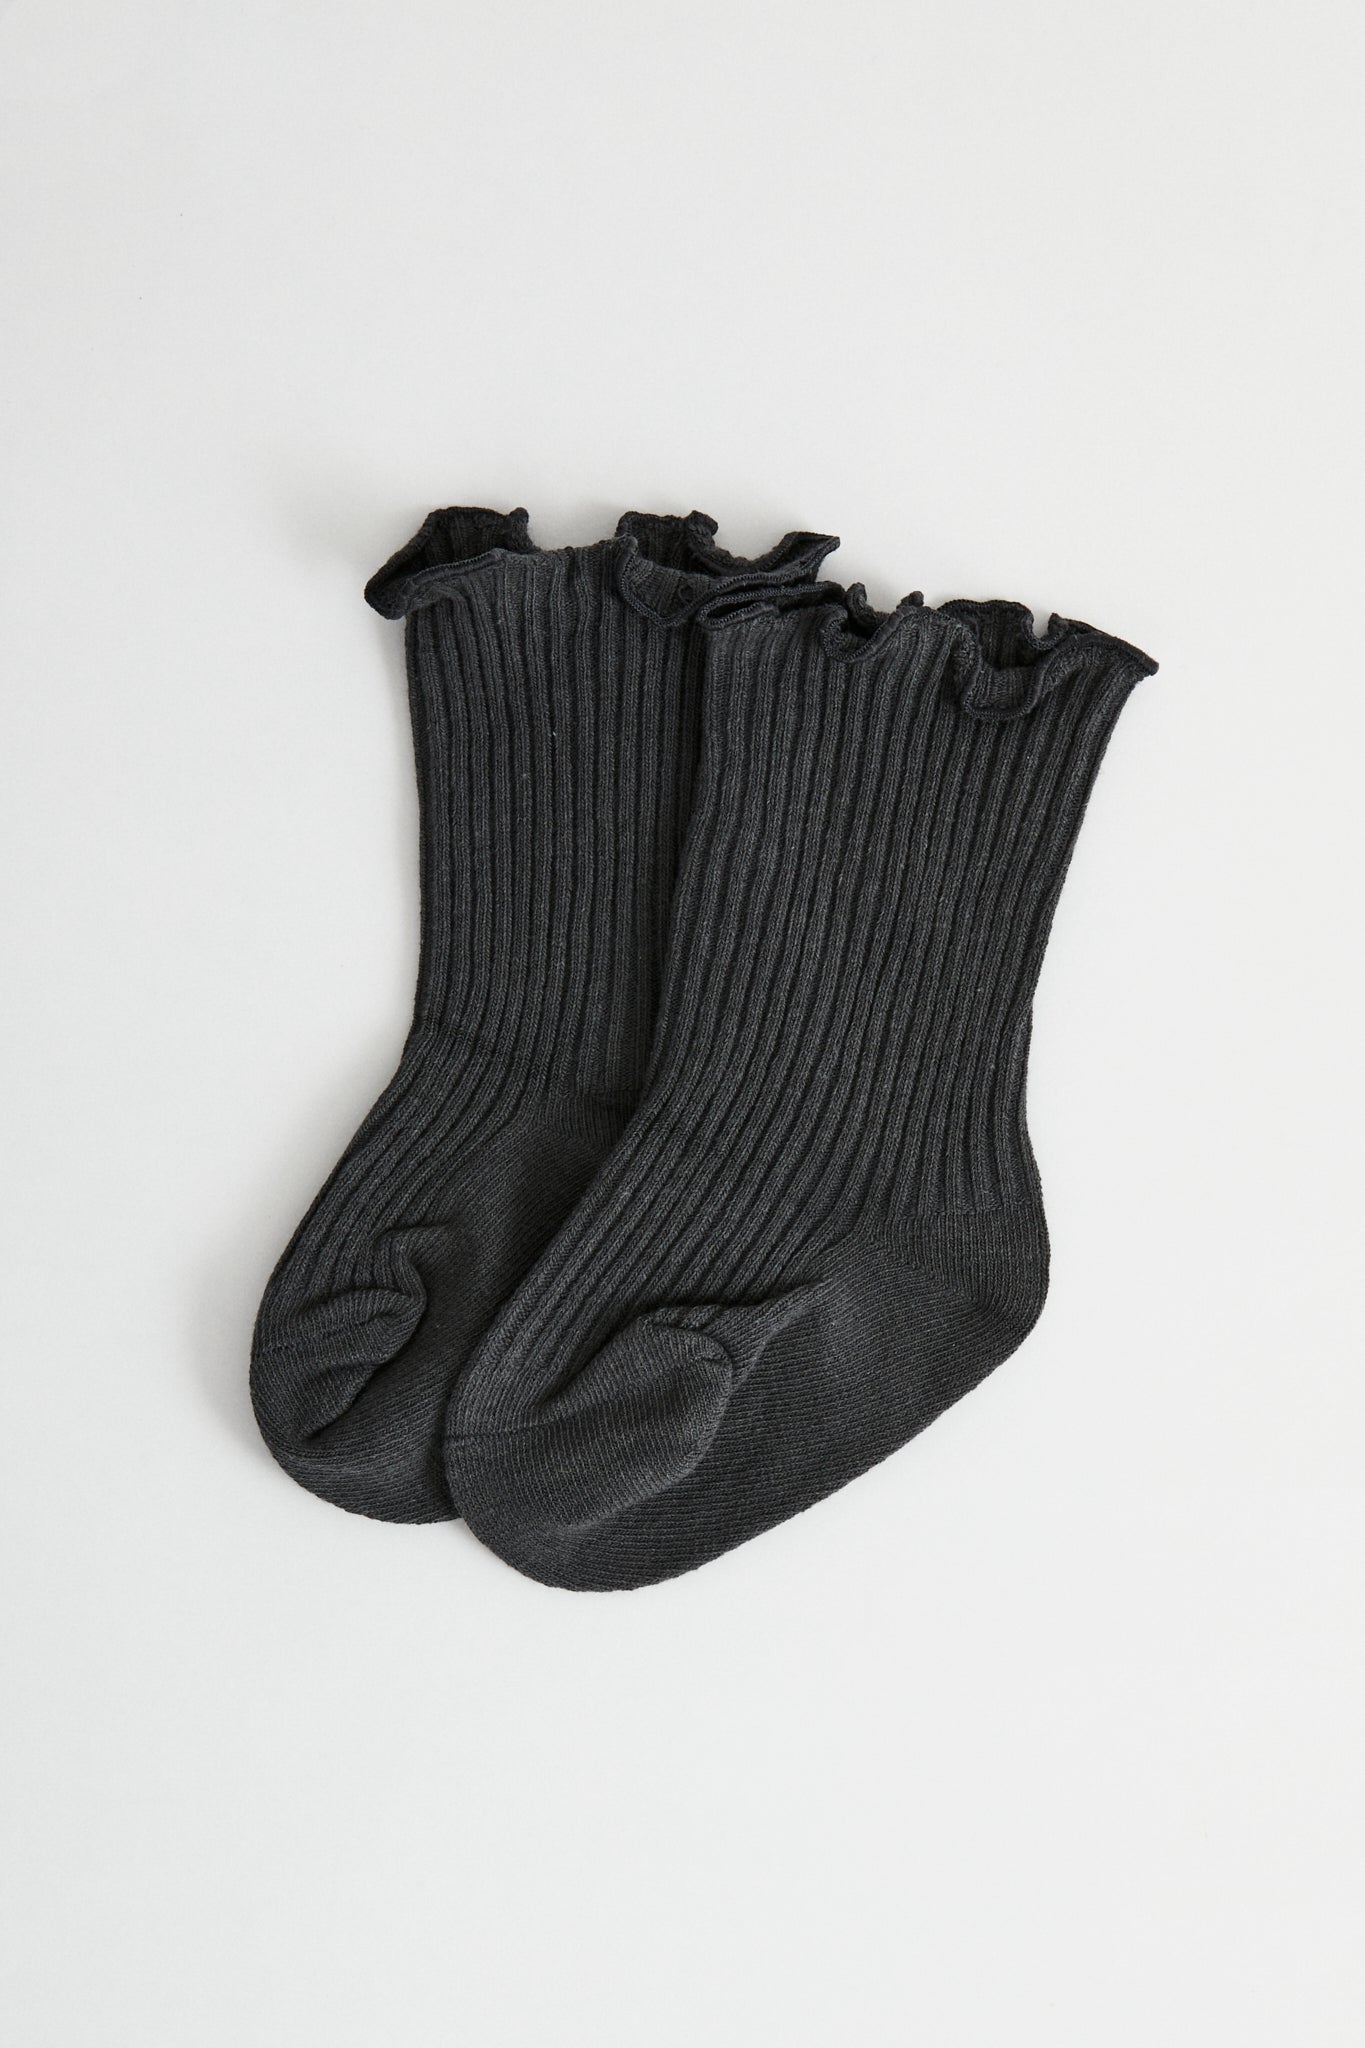 Ruffle and ribbed Socks in charcoal 